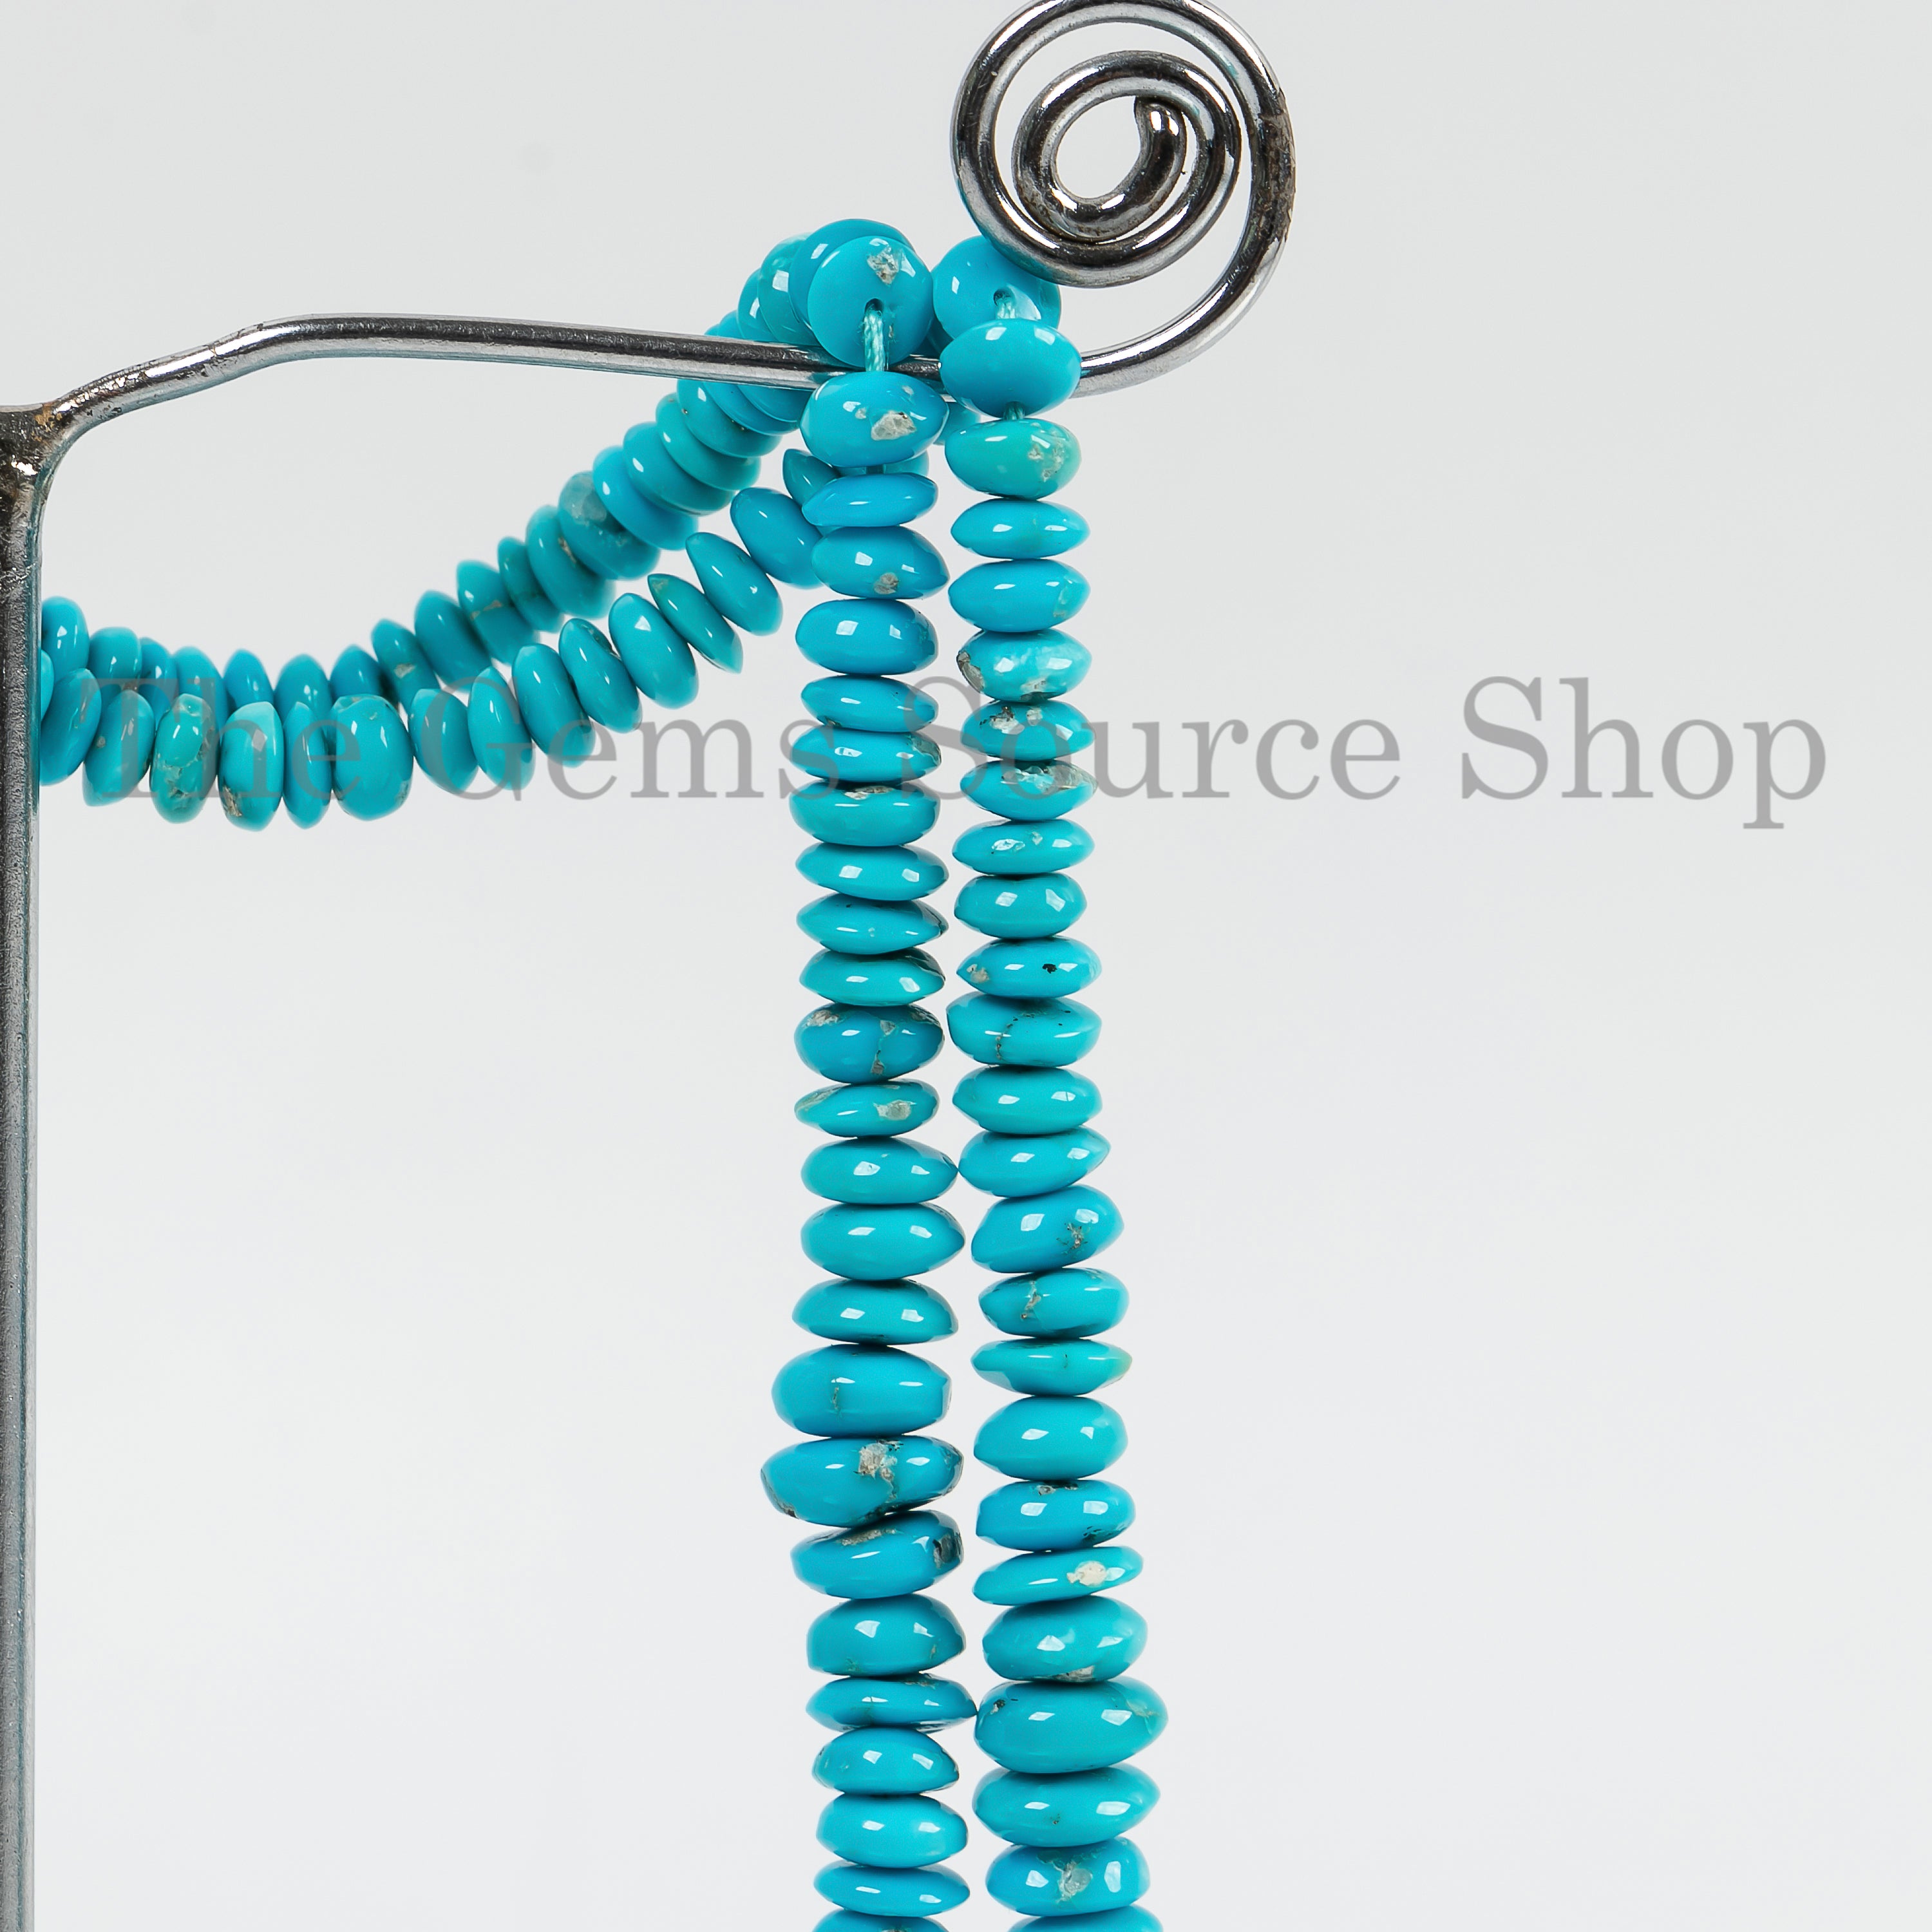 Sleeping Beauty Turquoise Beads, Turquoise Smooth Button Shape Beads